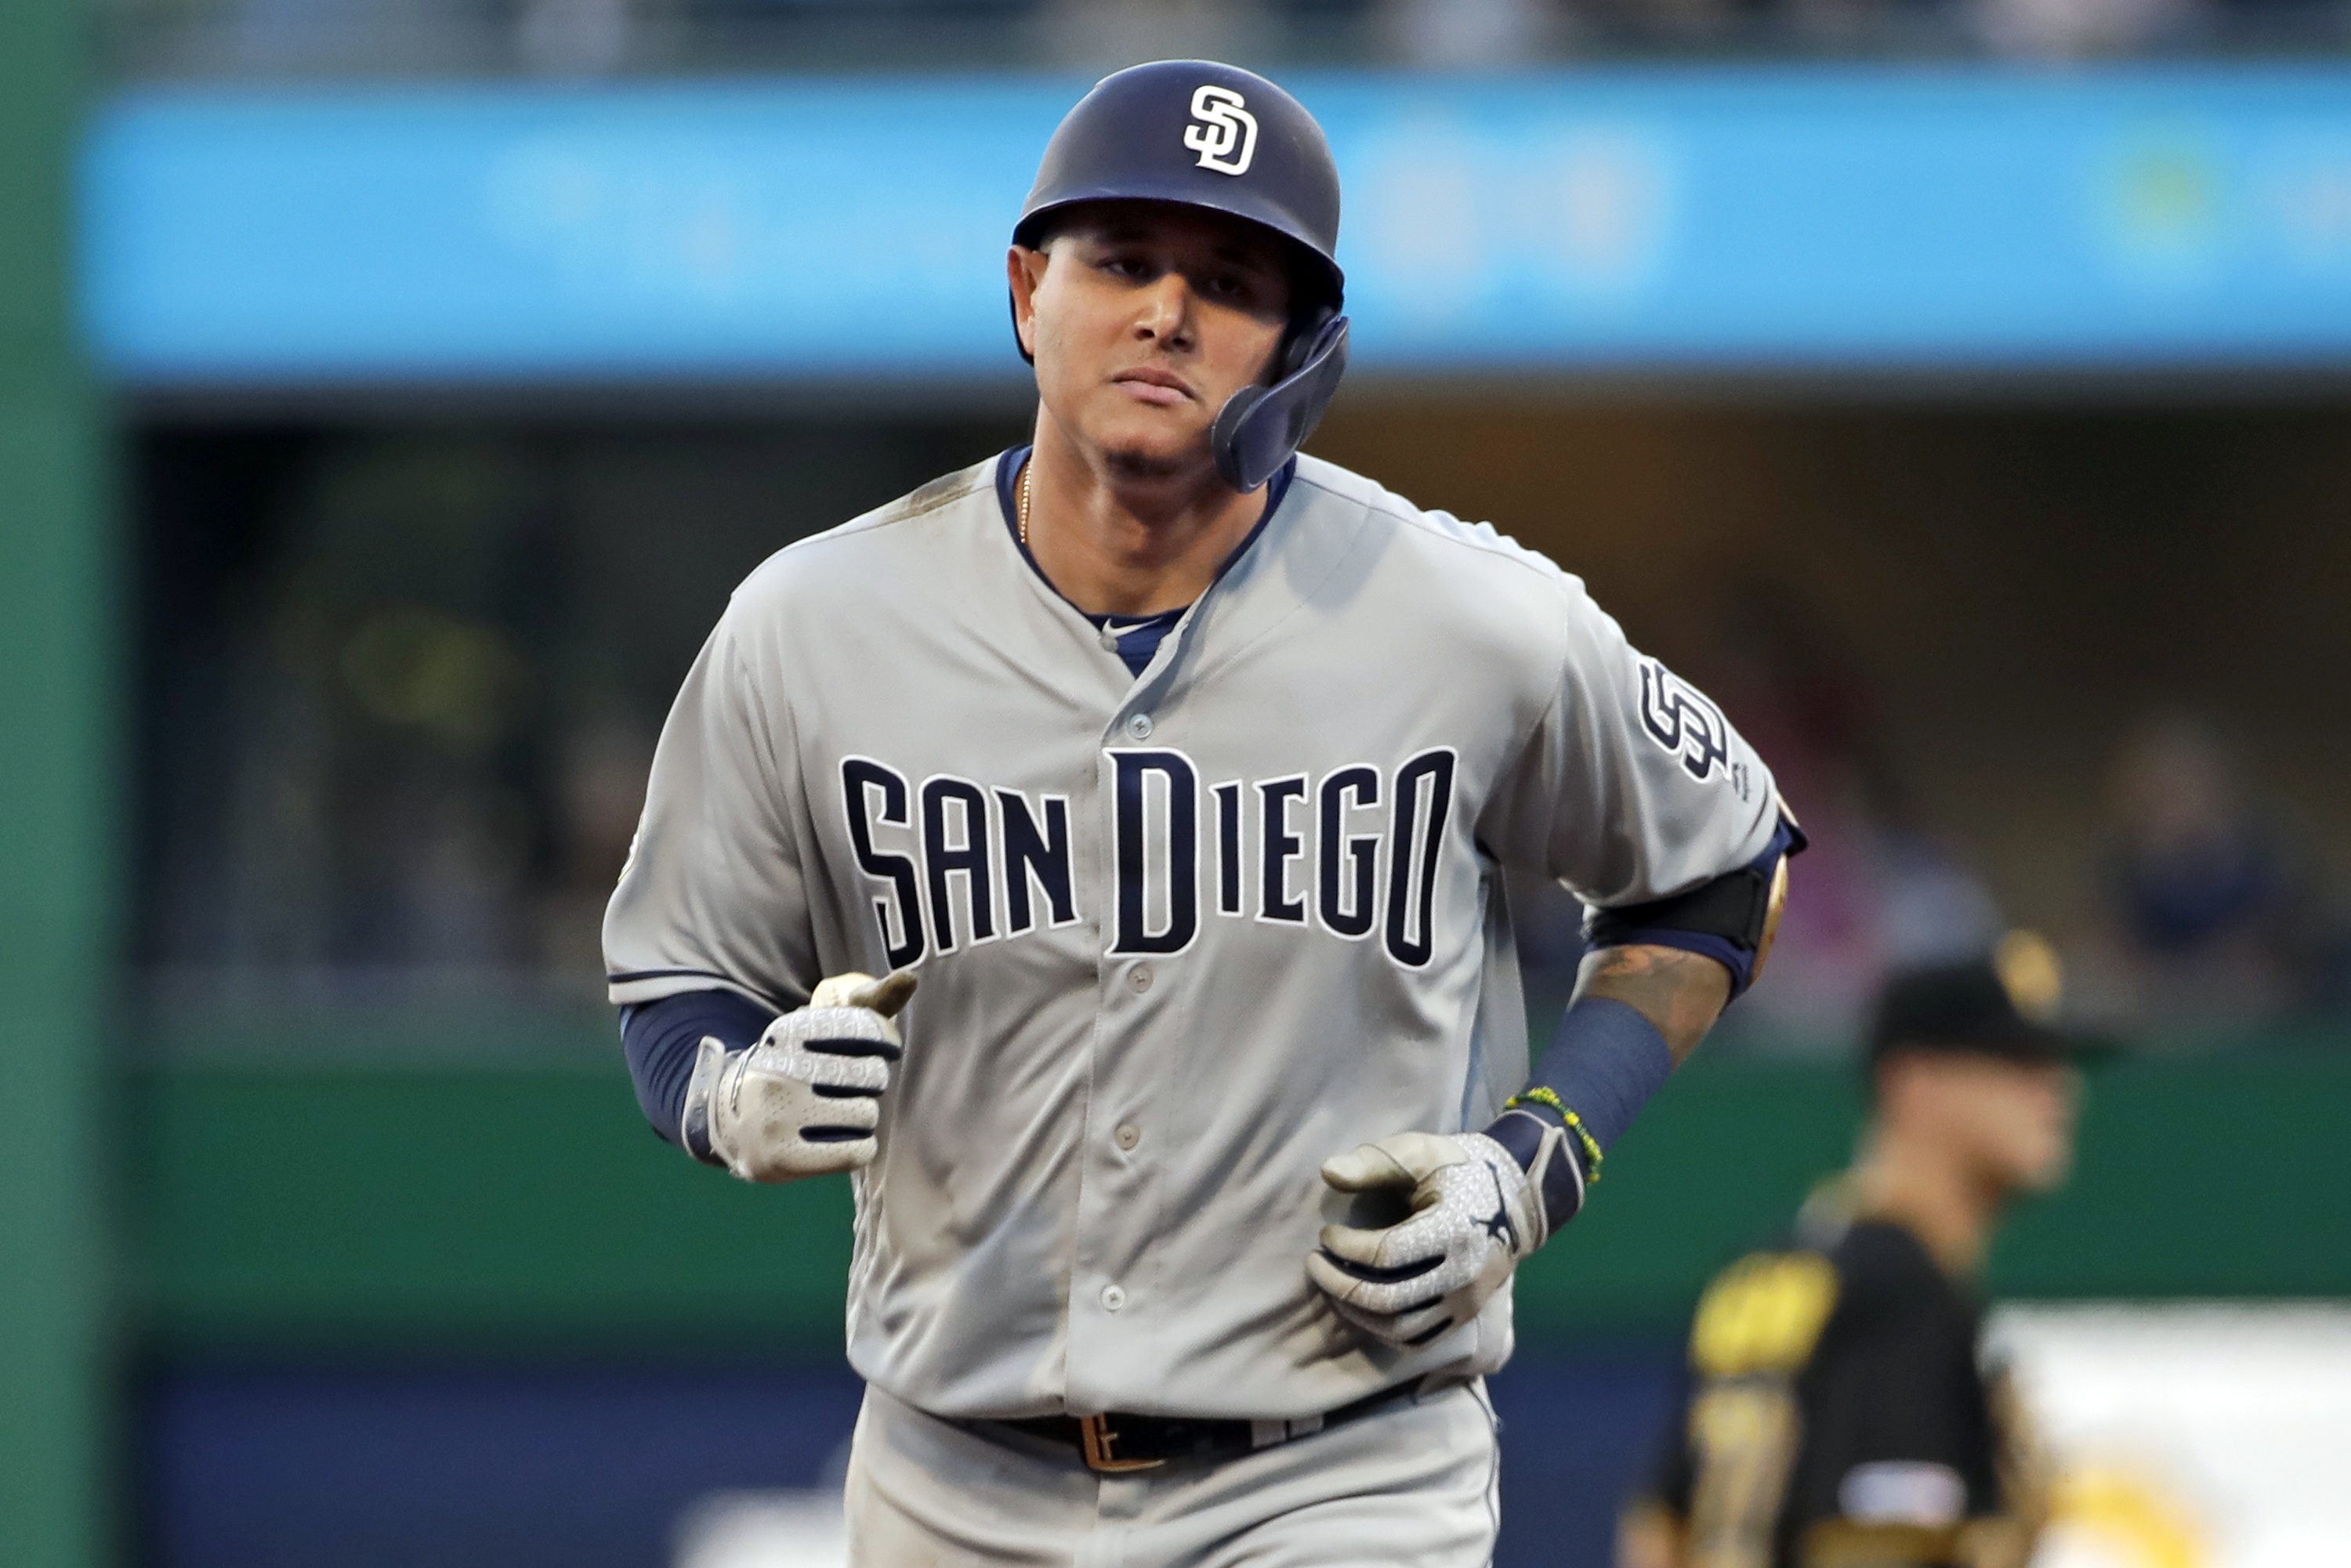 Video: Manny Machado Jokes He'll Bet $300M Contract Padres Win WS